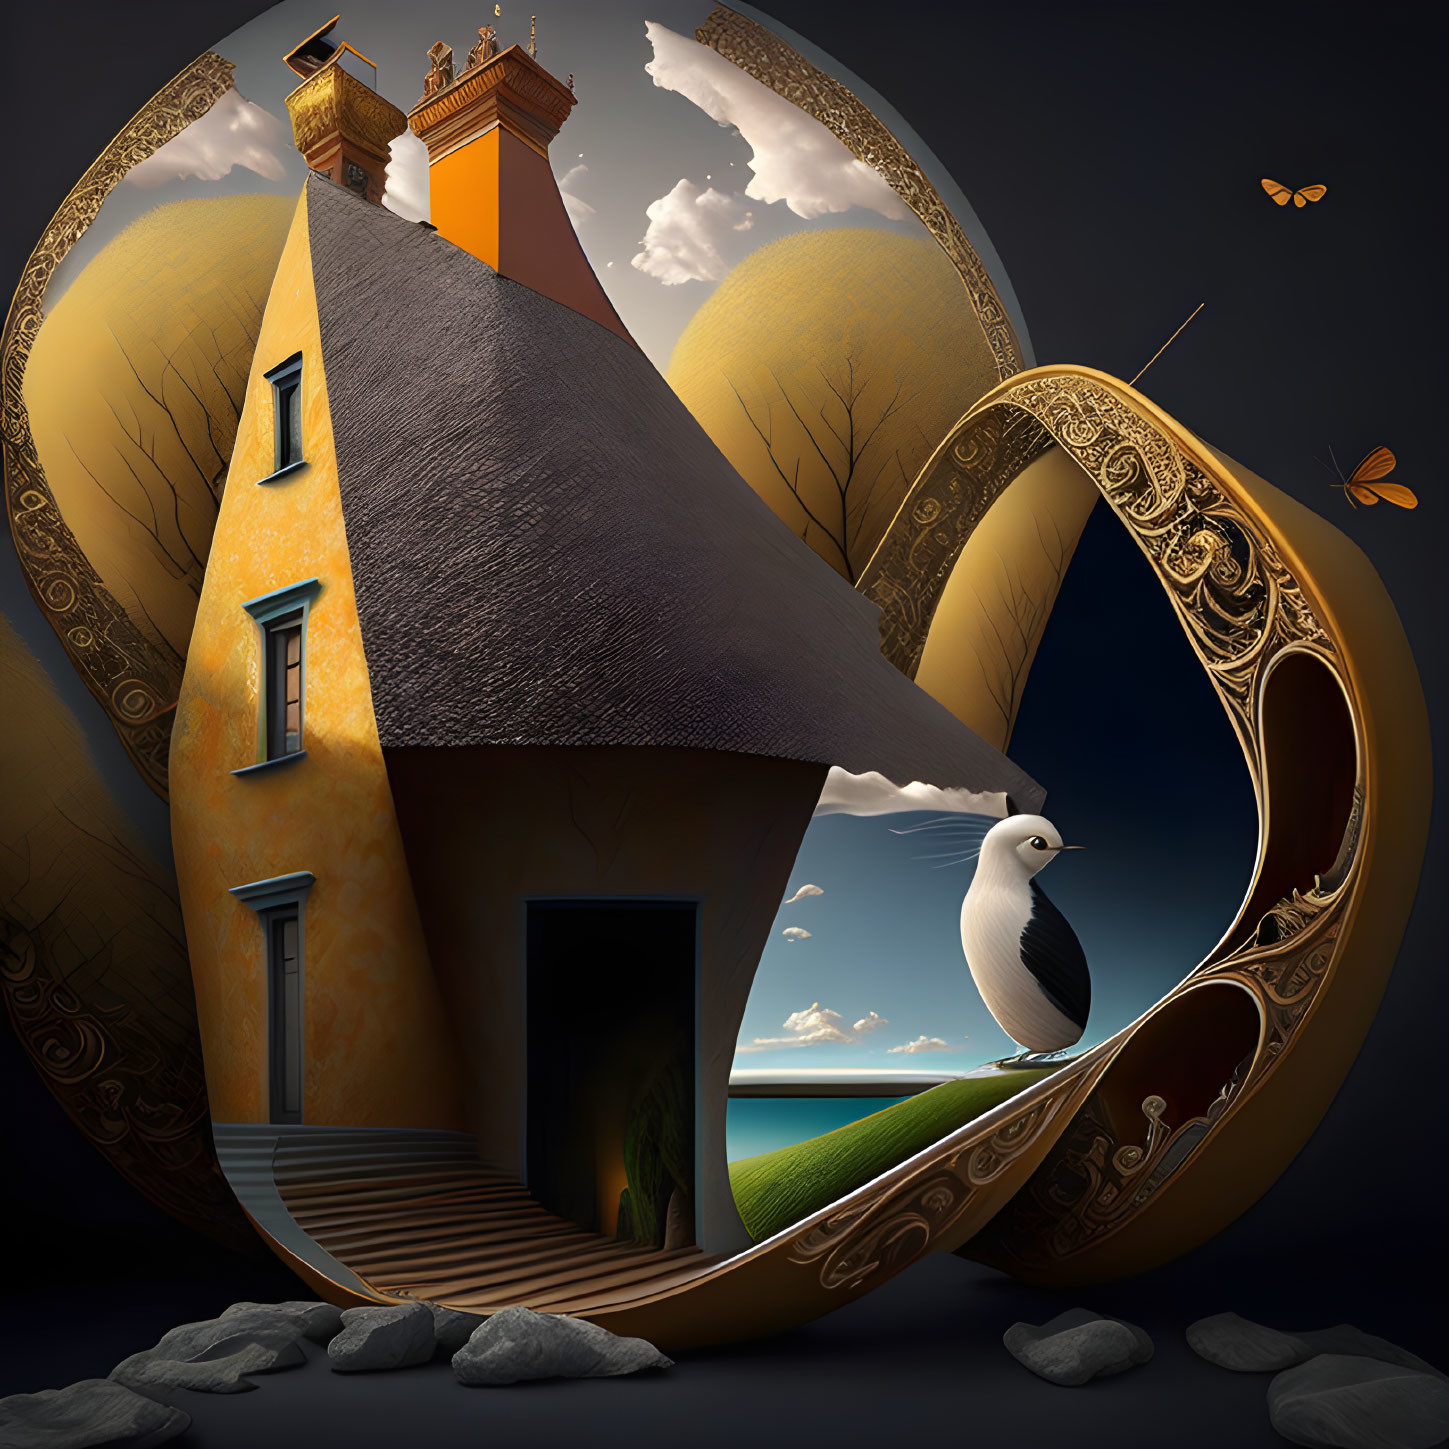 Surreal artwork with egg-shaped structure and cottage under dusky sky